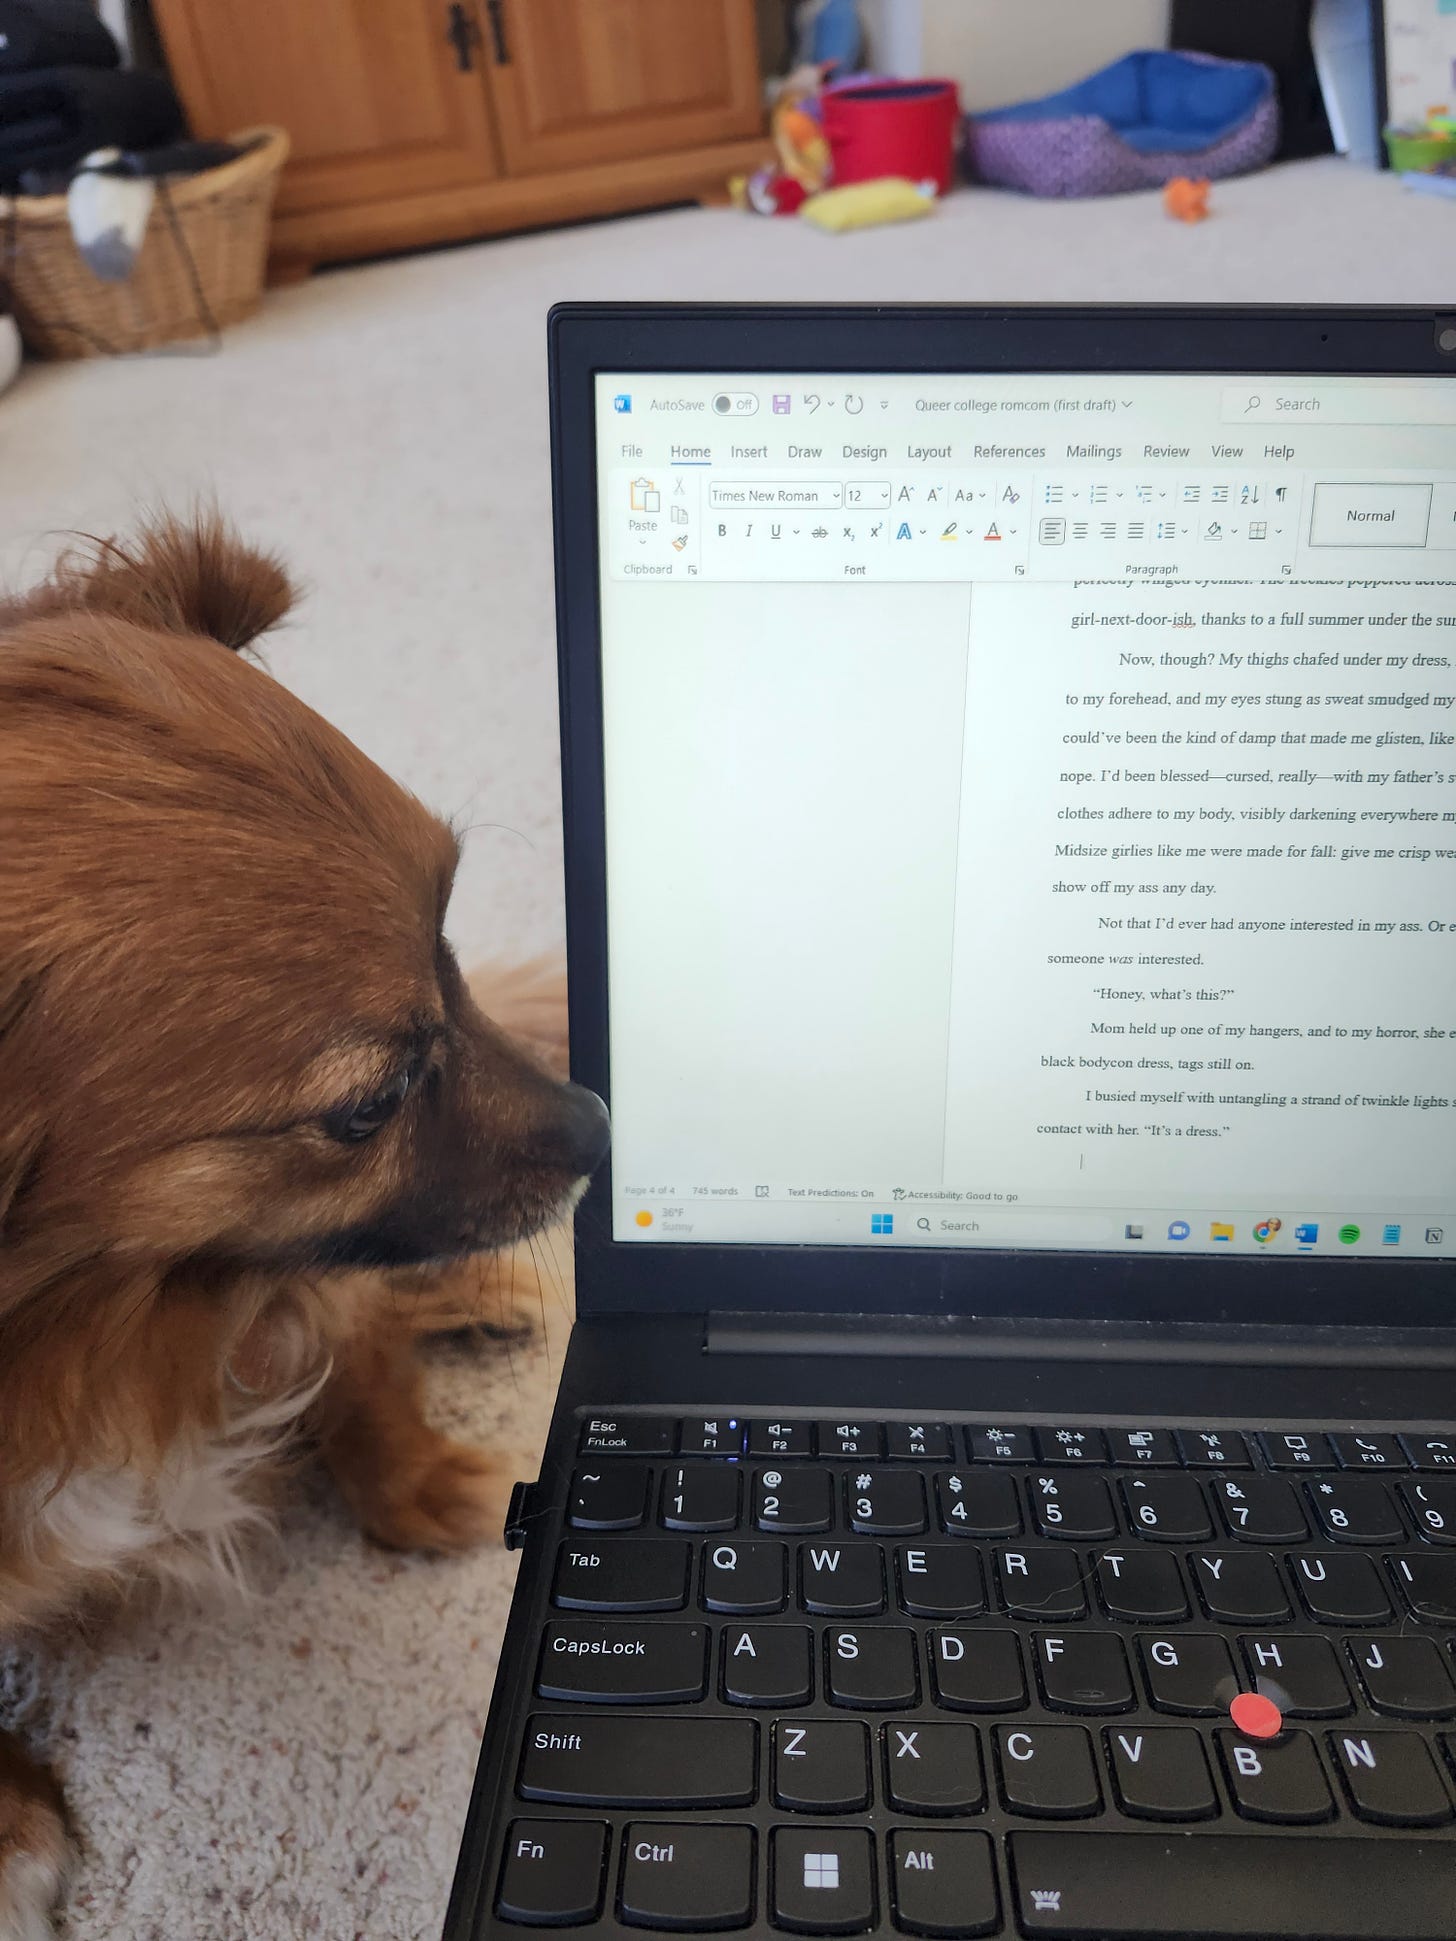 An adorable dog sneaking a glance at Kate's laptop screen, which is open to a Word document